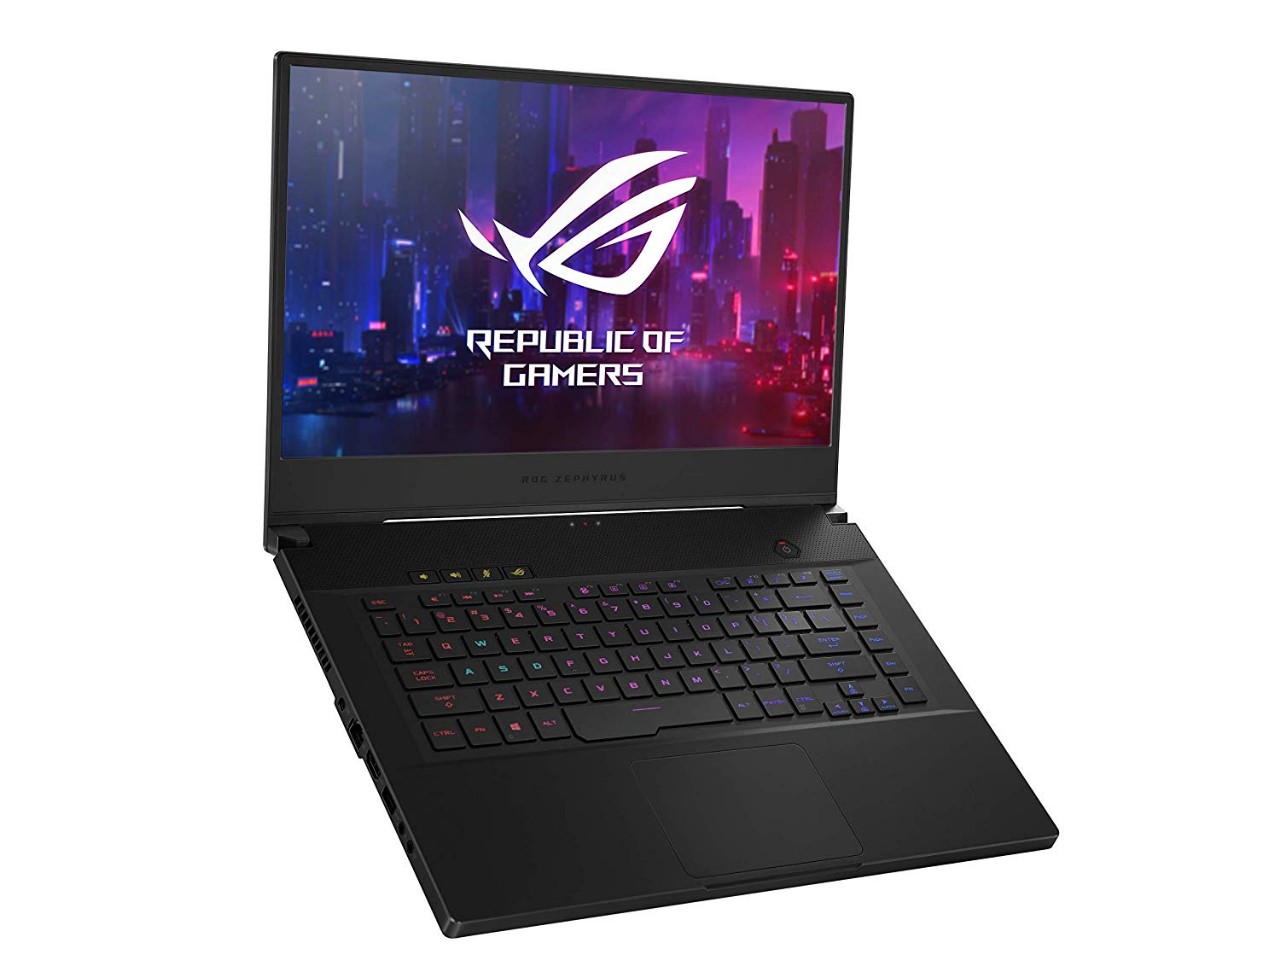 ROG Zephyrus M Thin and Portable Gaming Laptop, 15.6” 240Hz FHD IPS, NVIDIA GeForce RTX 2070, Intel